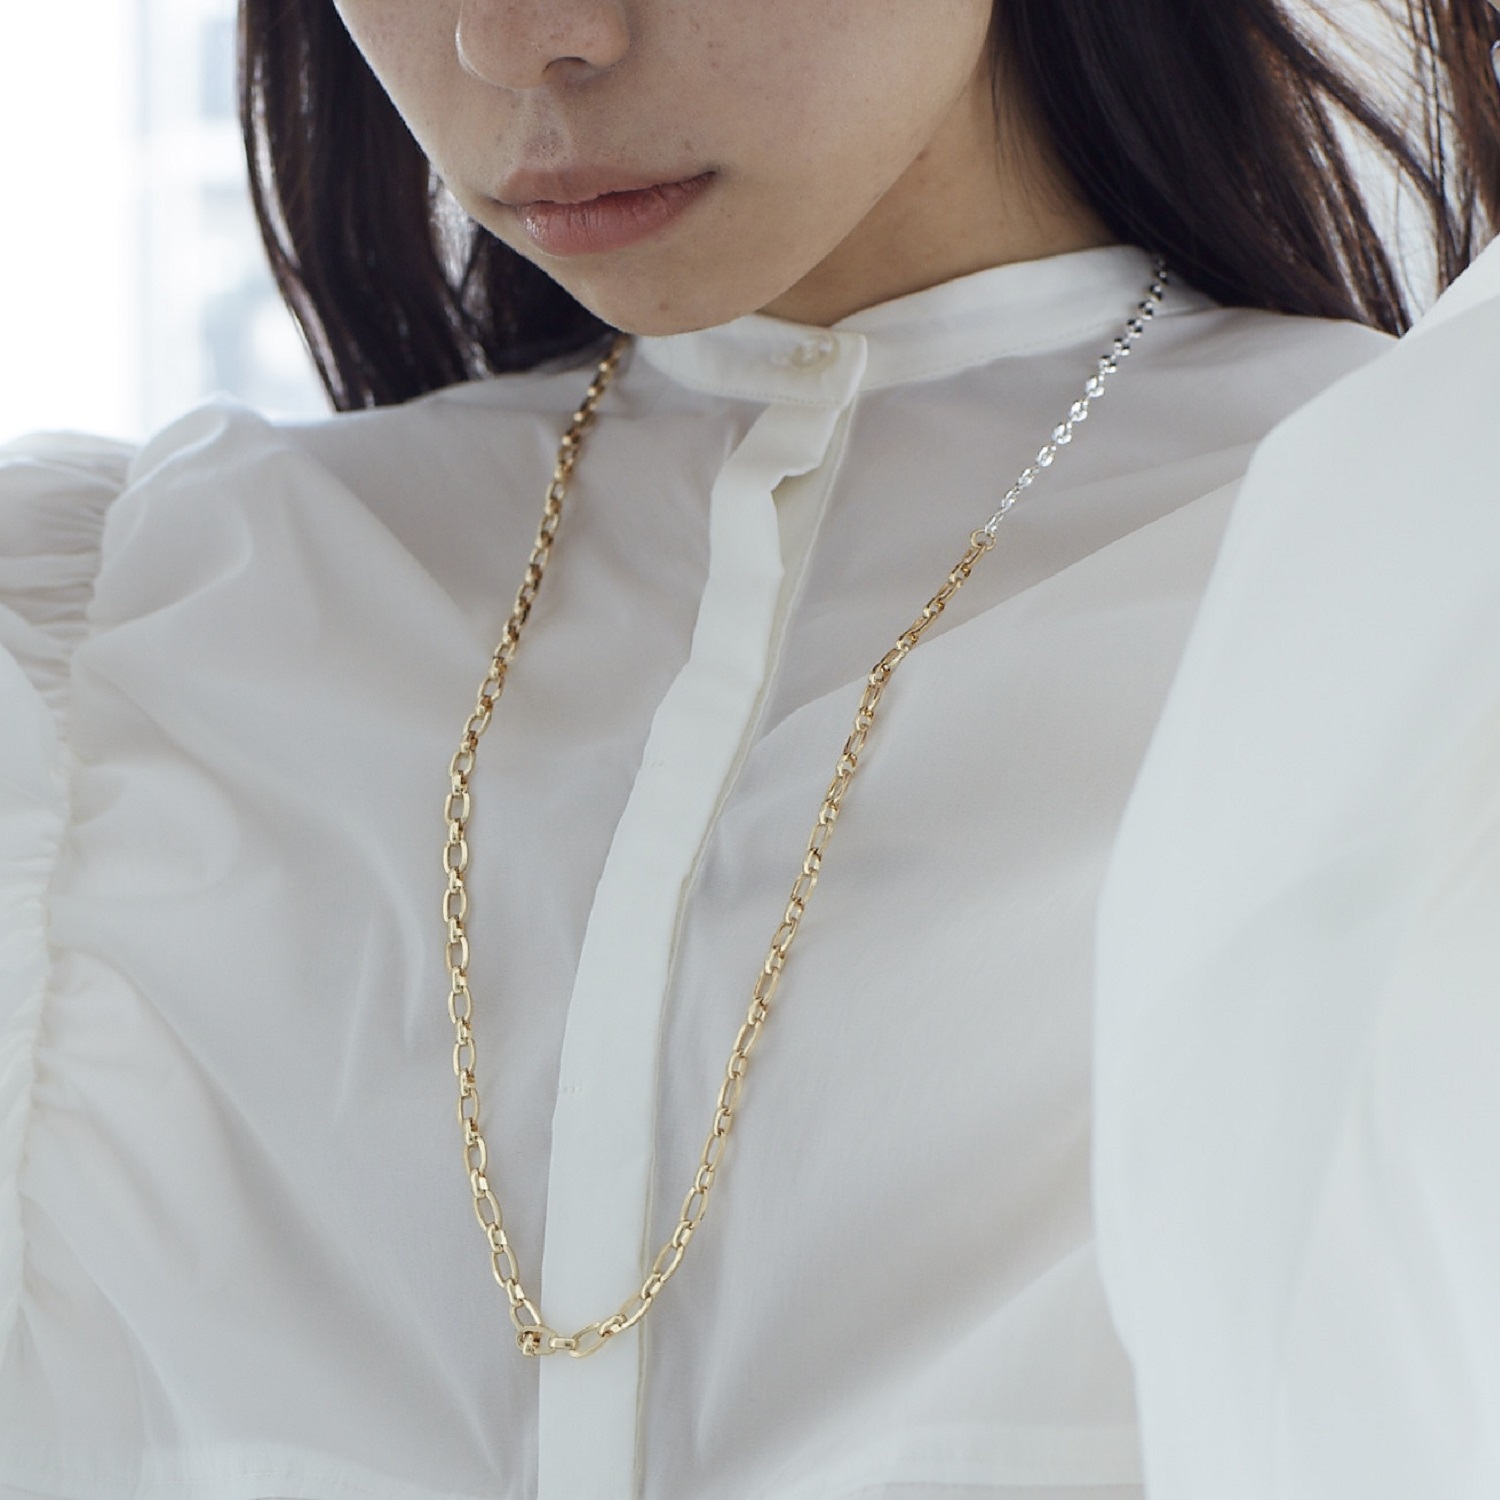 【Nothing And Others/ナッシングアンドアザーズ】Mix Chain 2way Necklace